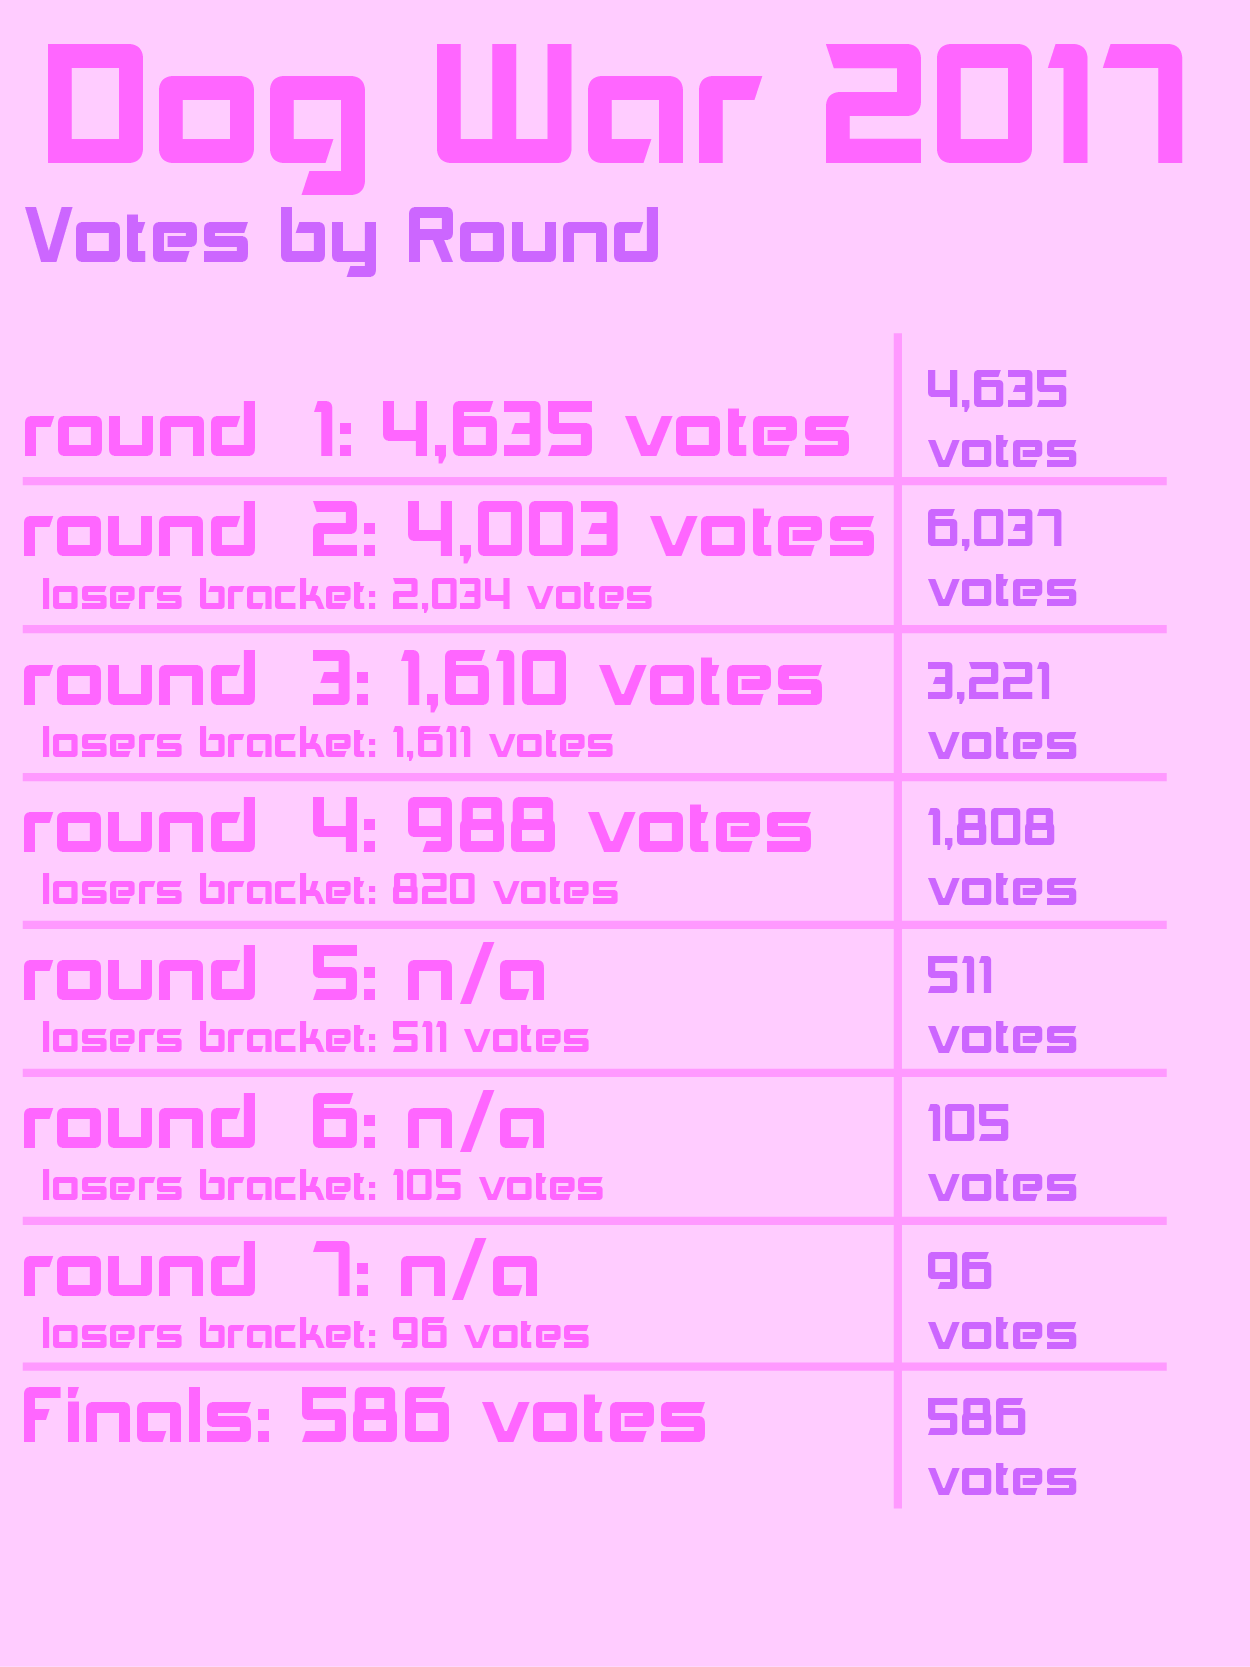 Dog War votes by round.So looking at the amount of votes cast, it is pretty obvious